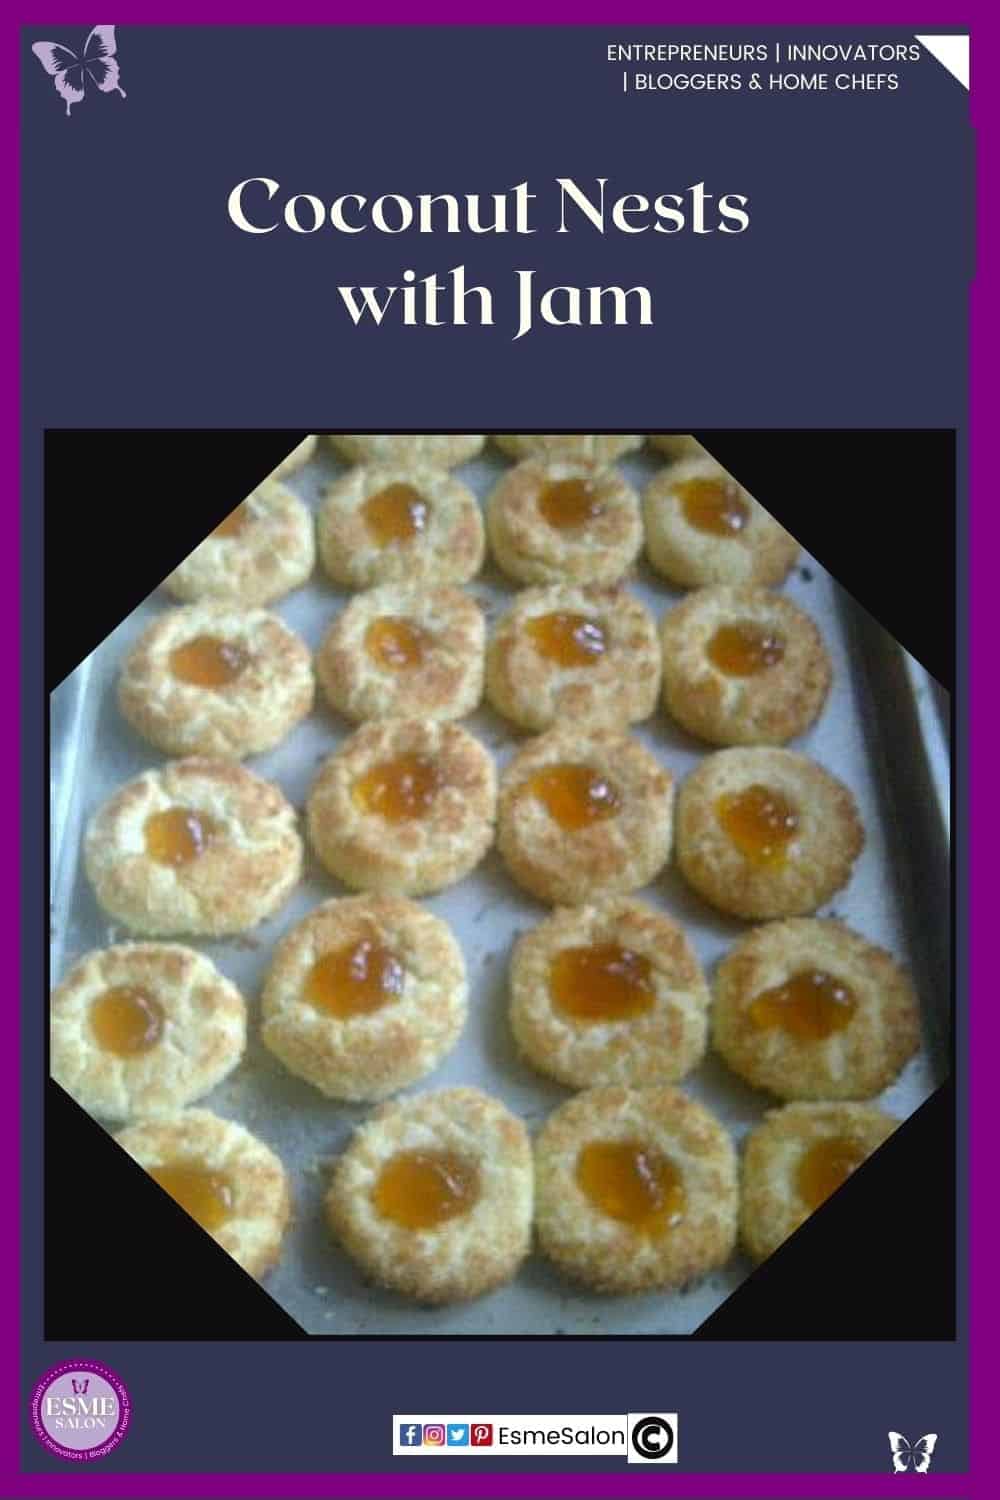 an image of a baking tray with parchment paper filled with already baked Coconut nests with Jam in the middle